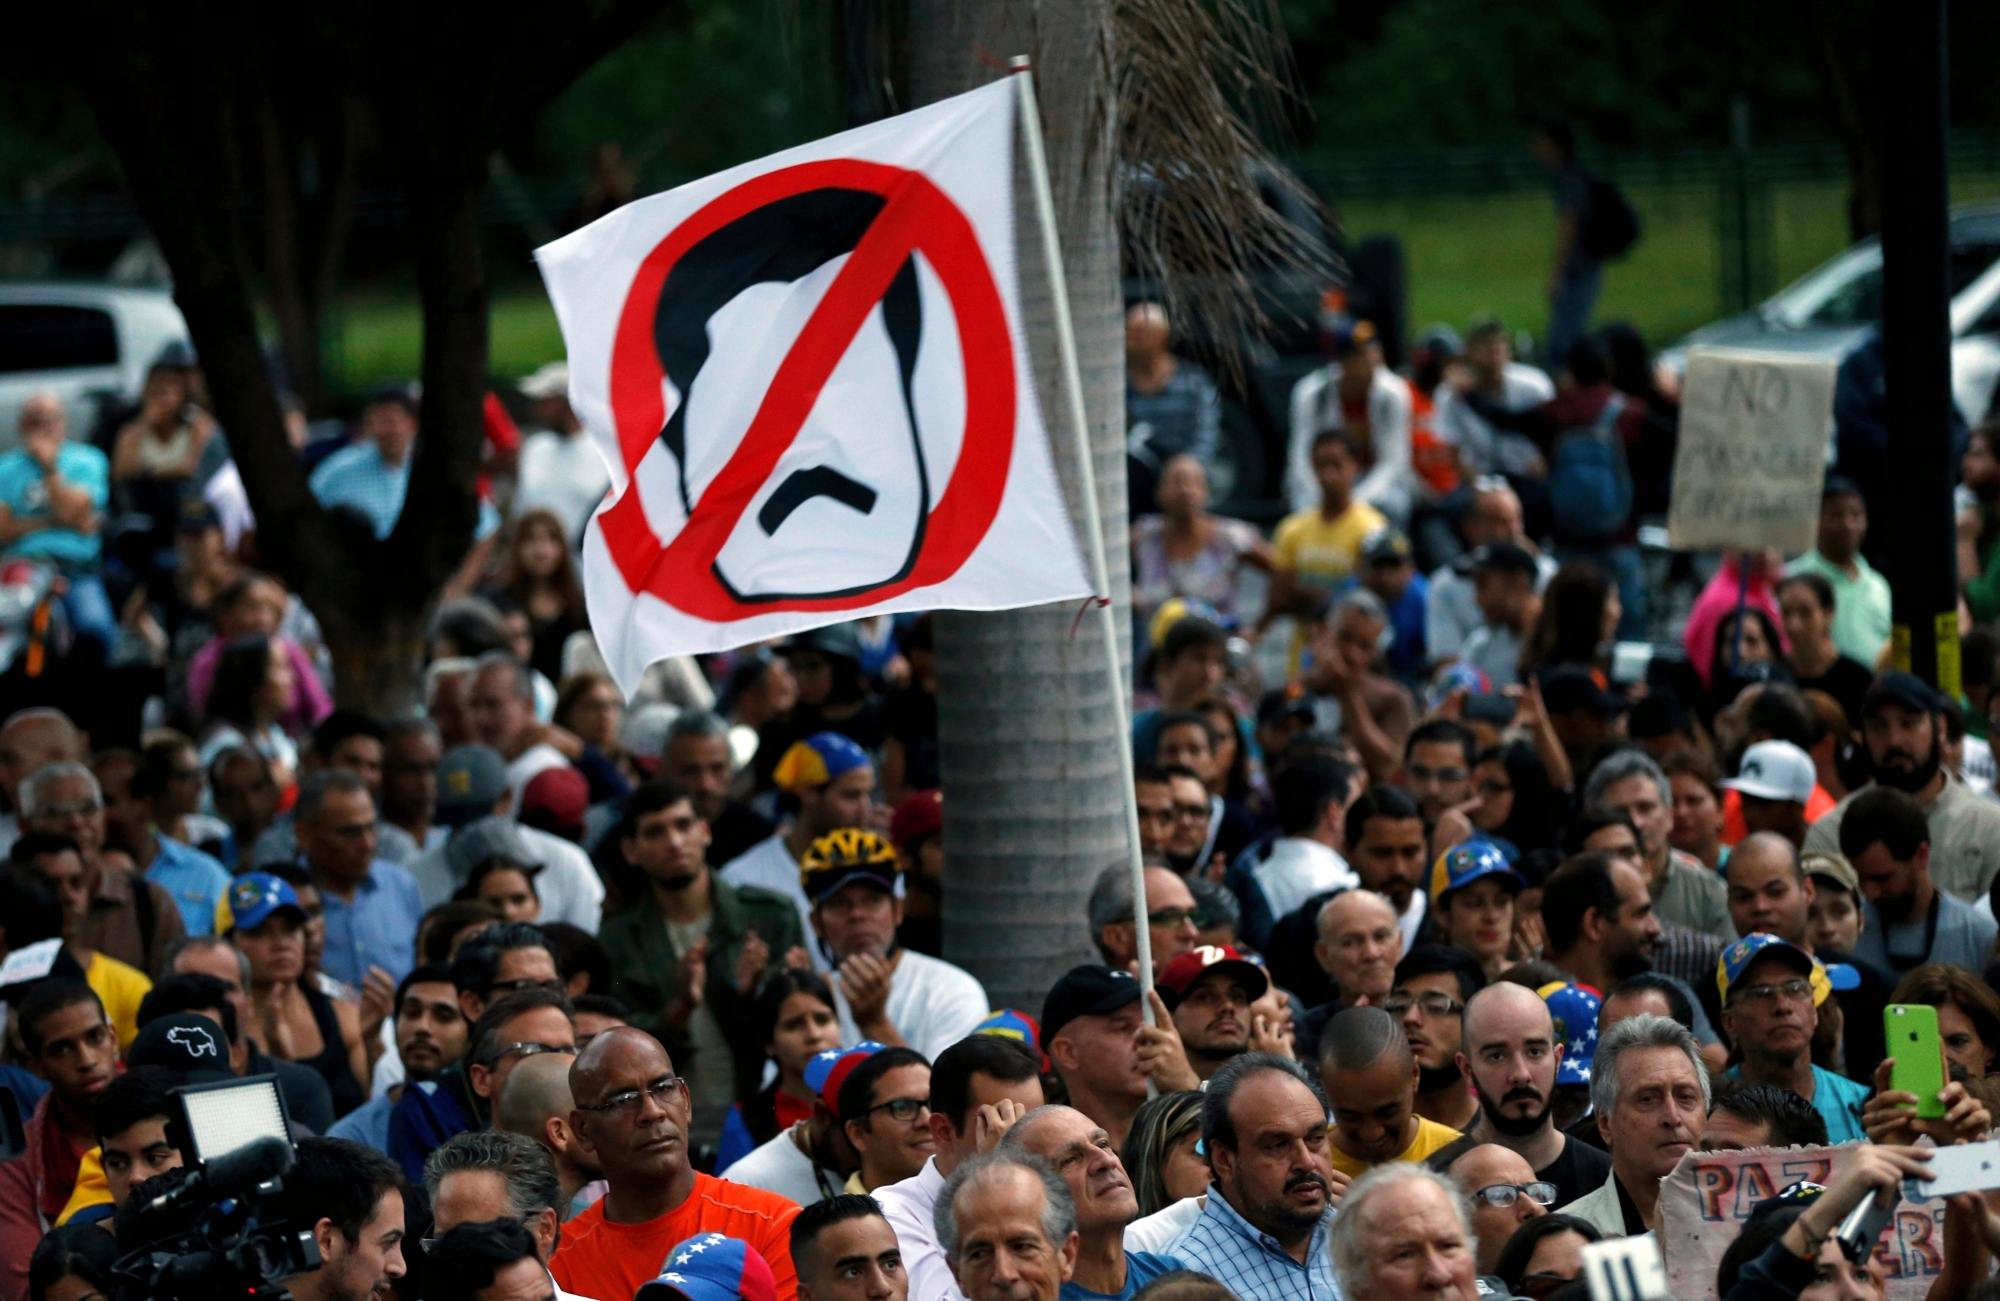 An anti-government demonstrator waves a flag against Venezuela's President Nicolas Maduro during a vigil in honor of those who have been killed during clashes between security forces and demonstrators in Caracas, Venezuela, Monday, July 31, 2017. Many analysts believe Sunday's vote for a newly elected assembly that will rewrite VenezuelaÄôs constitution will catalyze yet more disturbances in a country that has seen four months of street protests in which at least 125 people have died. (AP Photo/Ariana Cubillos) Venezuela Political Crisis